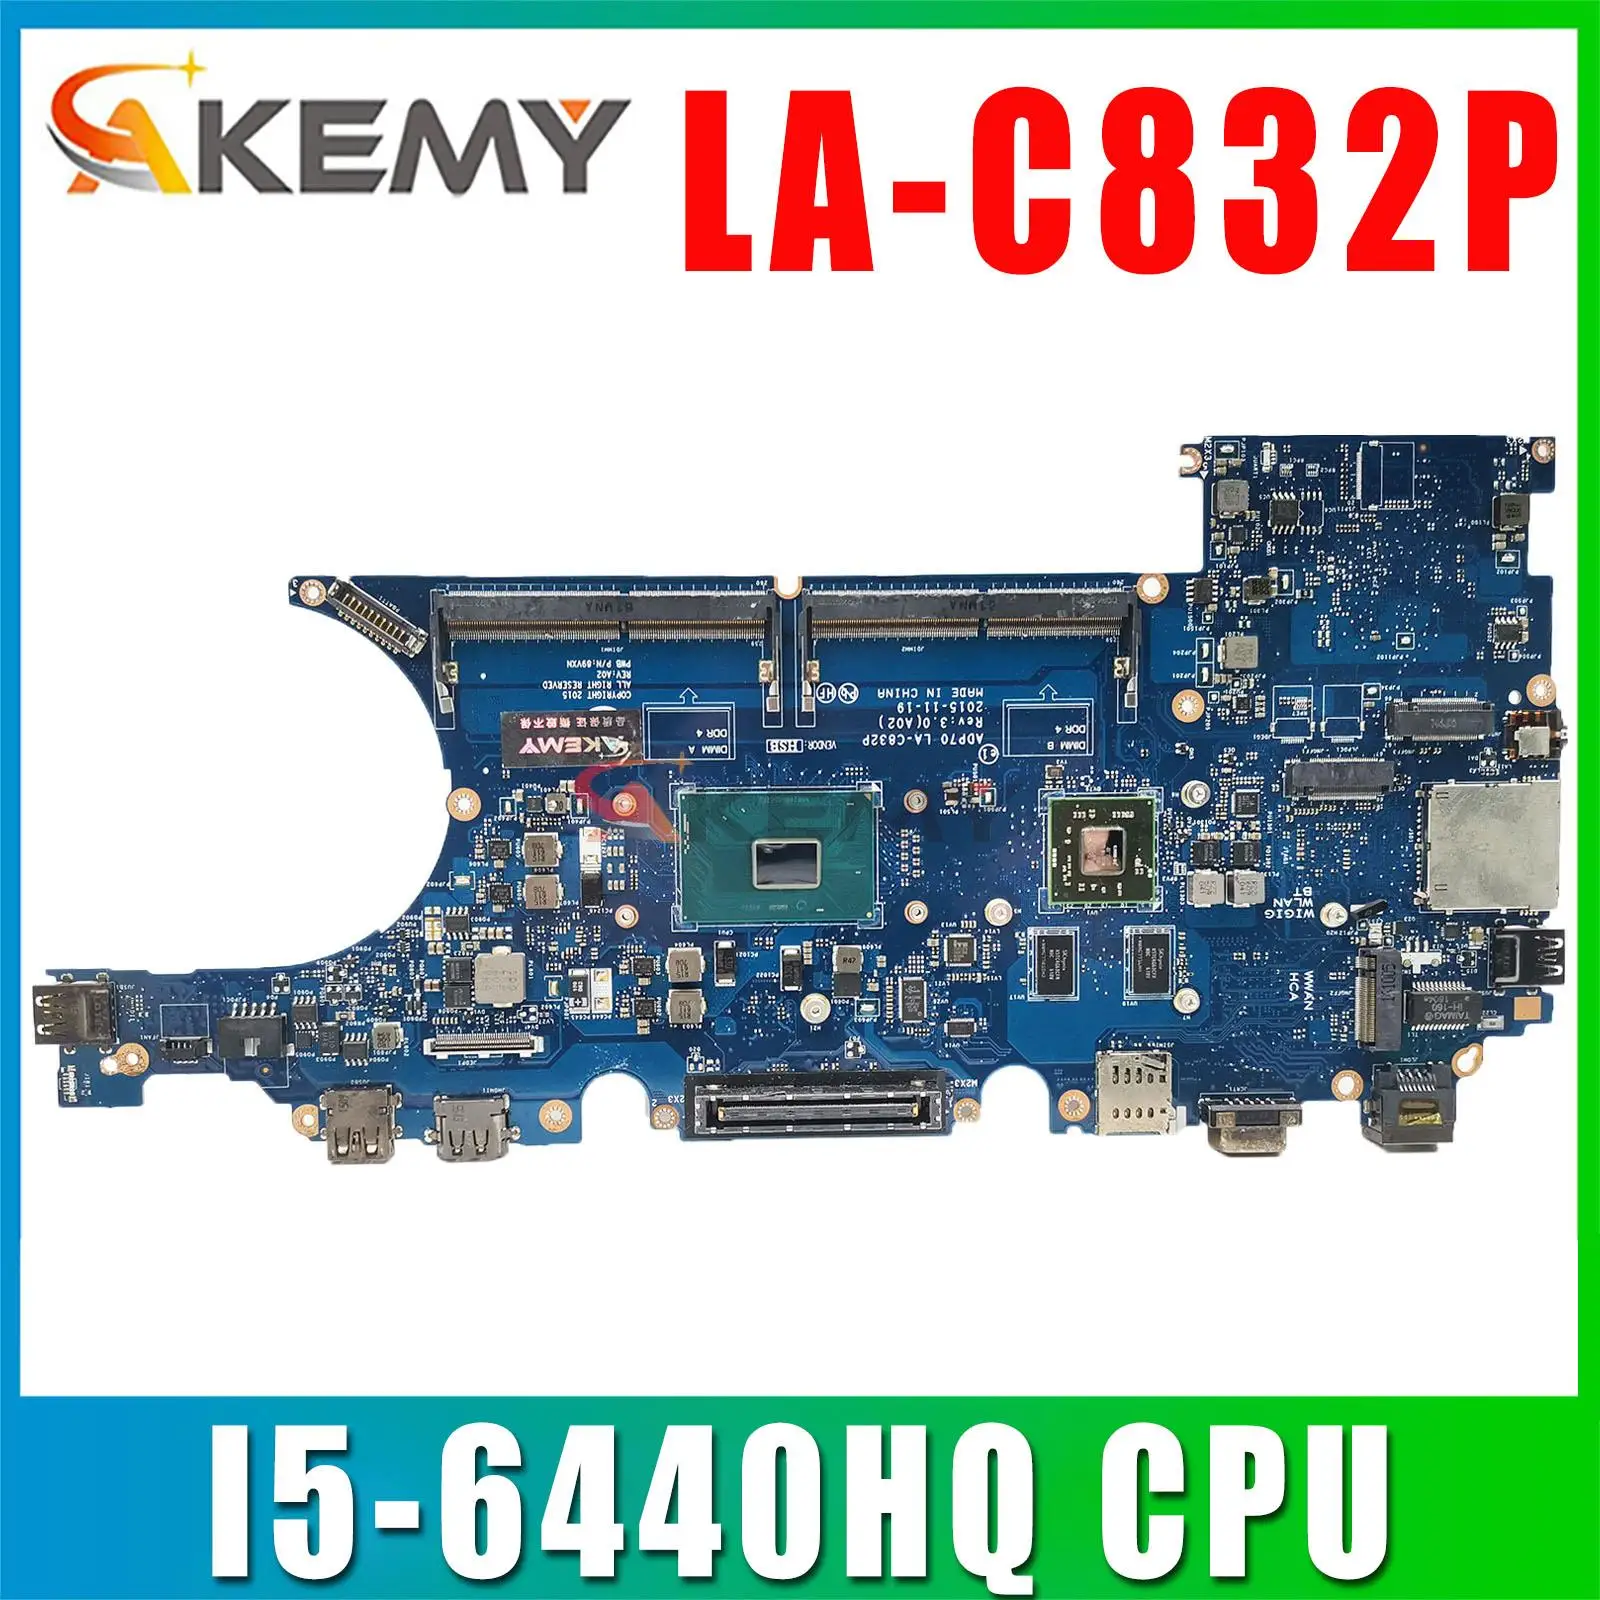 

LA-C832P i5-6440HQ FOR Dell Latitude 14 5480 E5480 Laptop Notebook Motherboard CN-0KP60X KP60X Mainboard 100% Tested